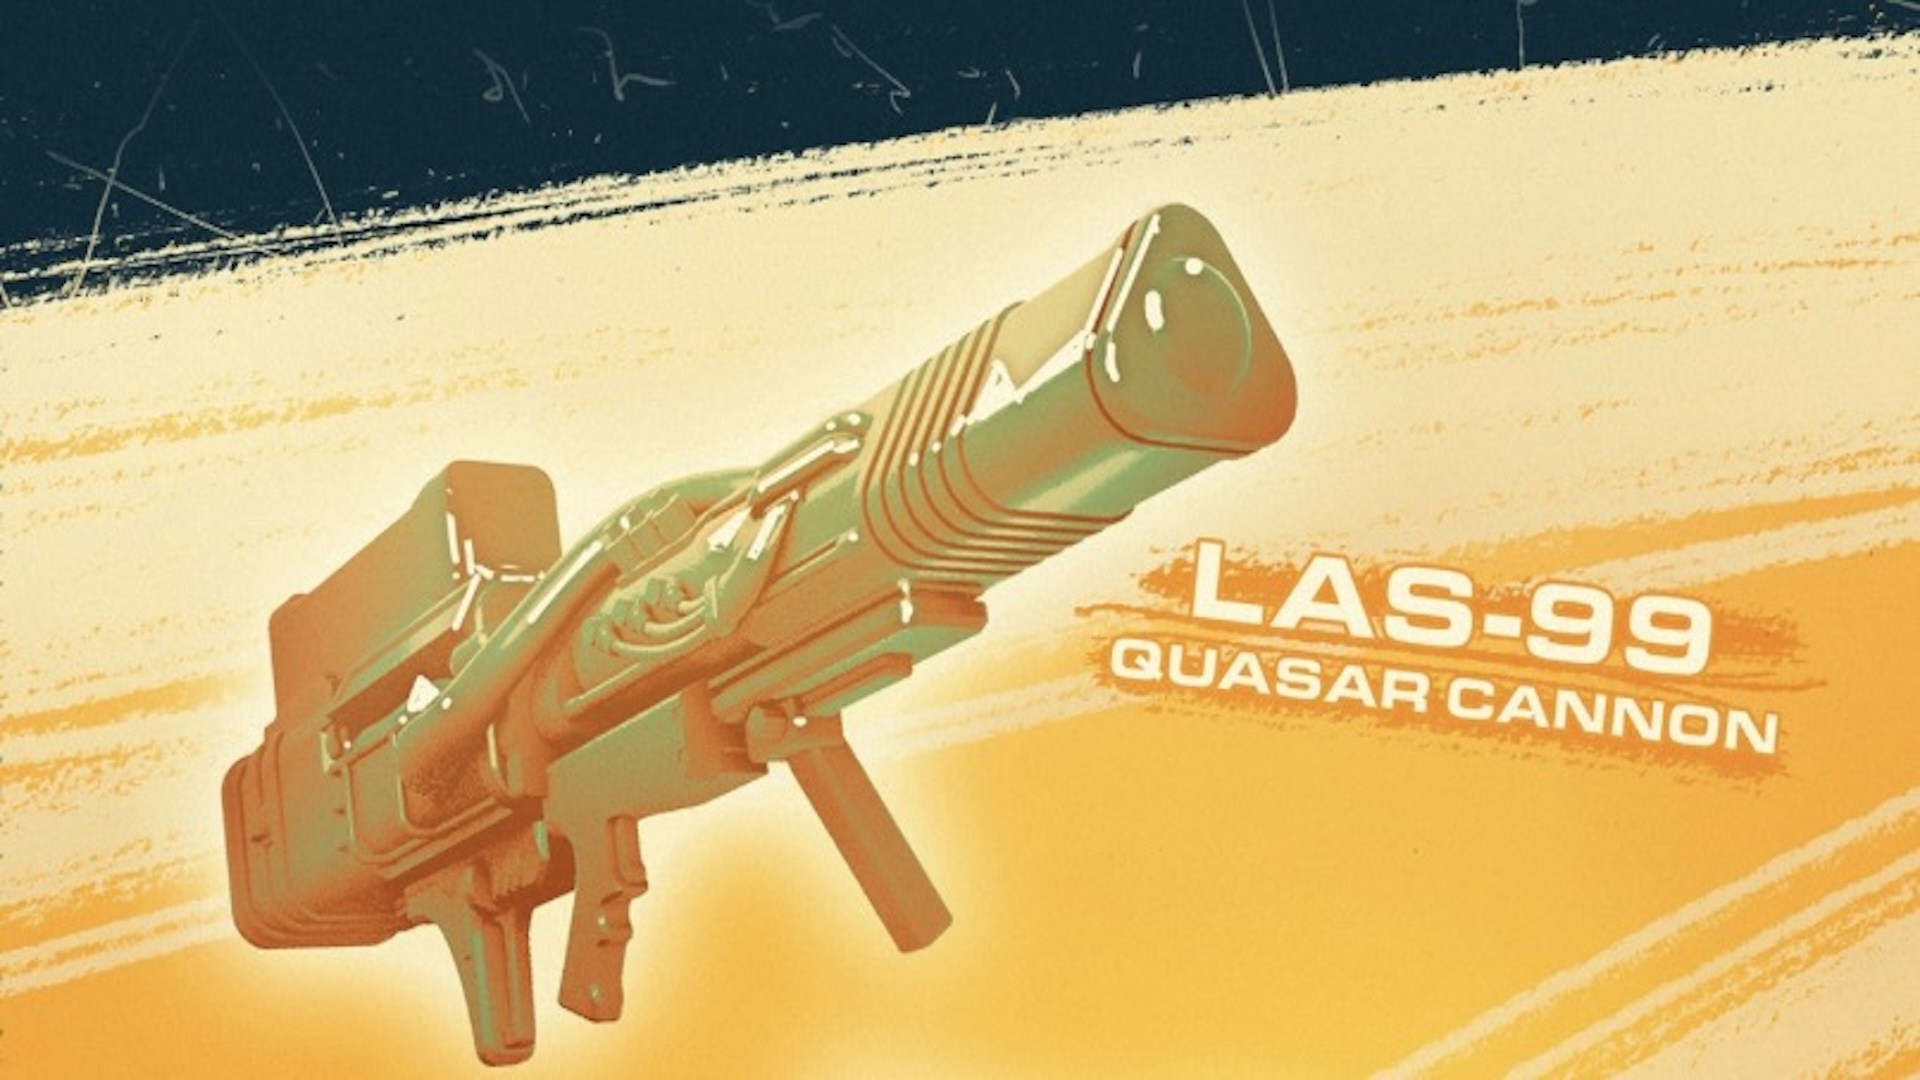 The LAS-99 Quasar Cannon against a yellow background